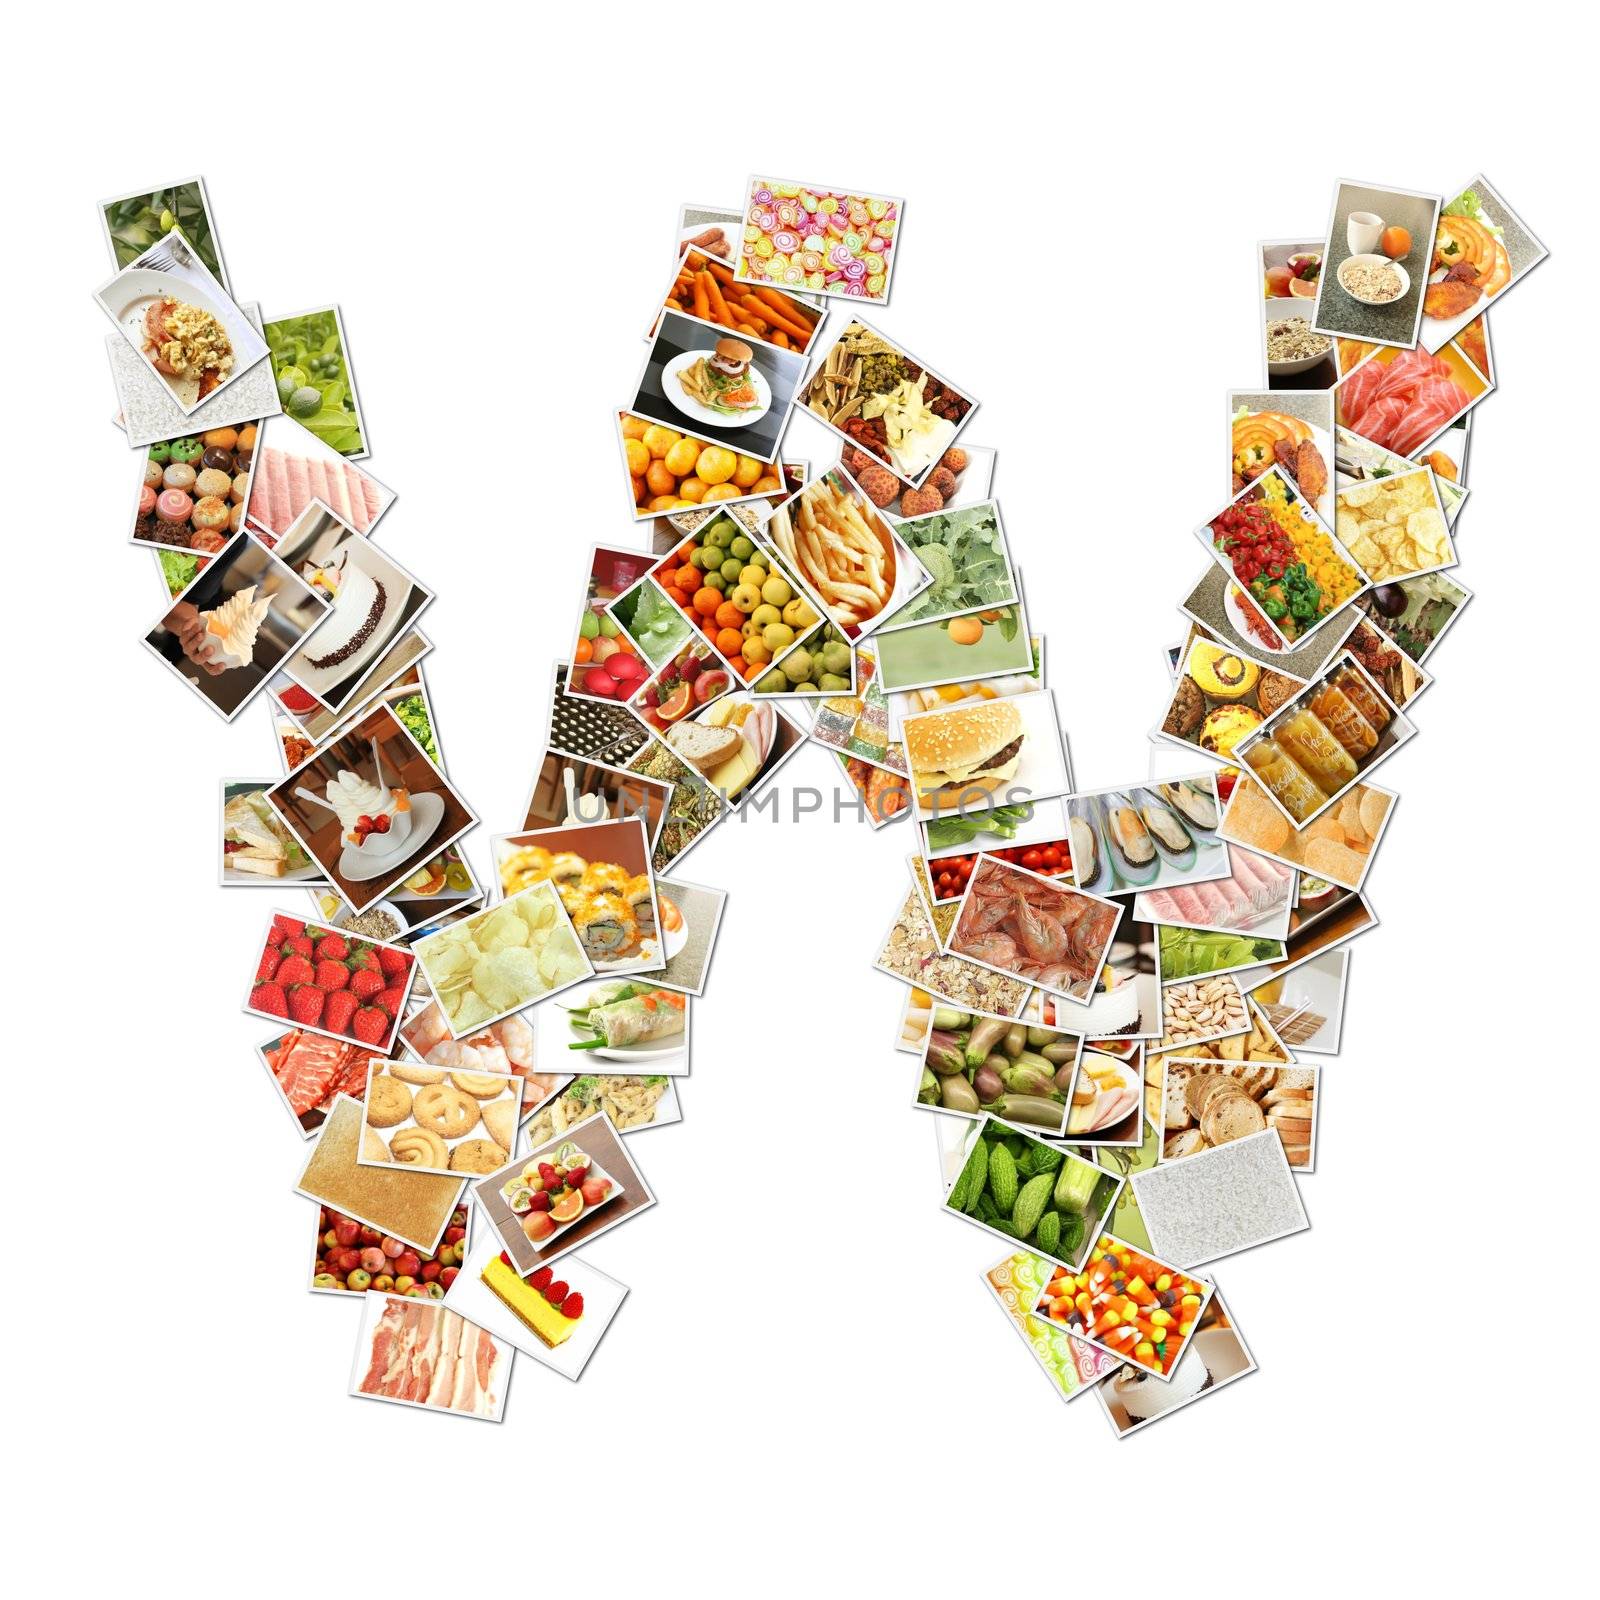 Letter W with Food Collage Concept Art